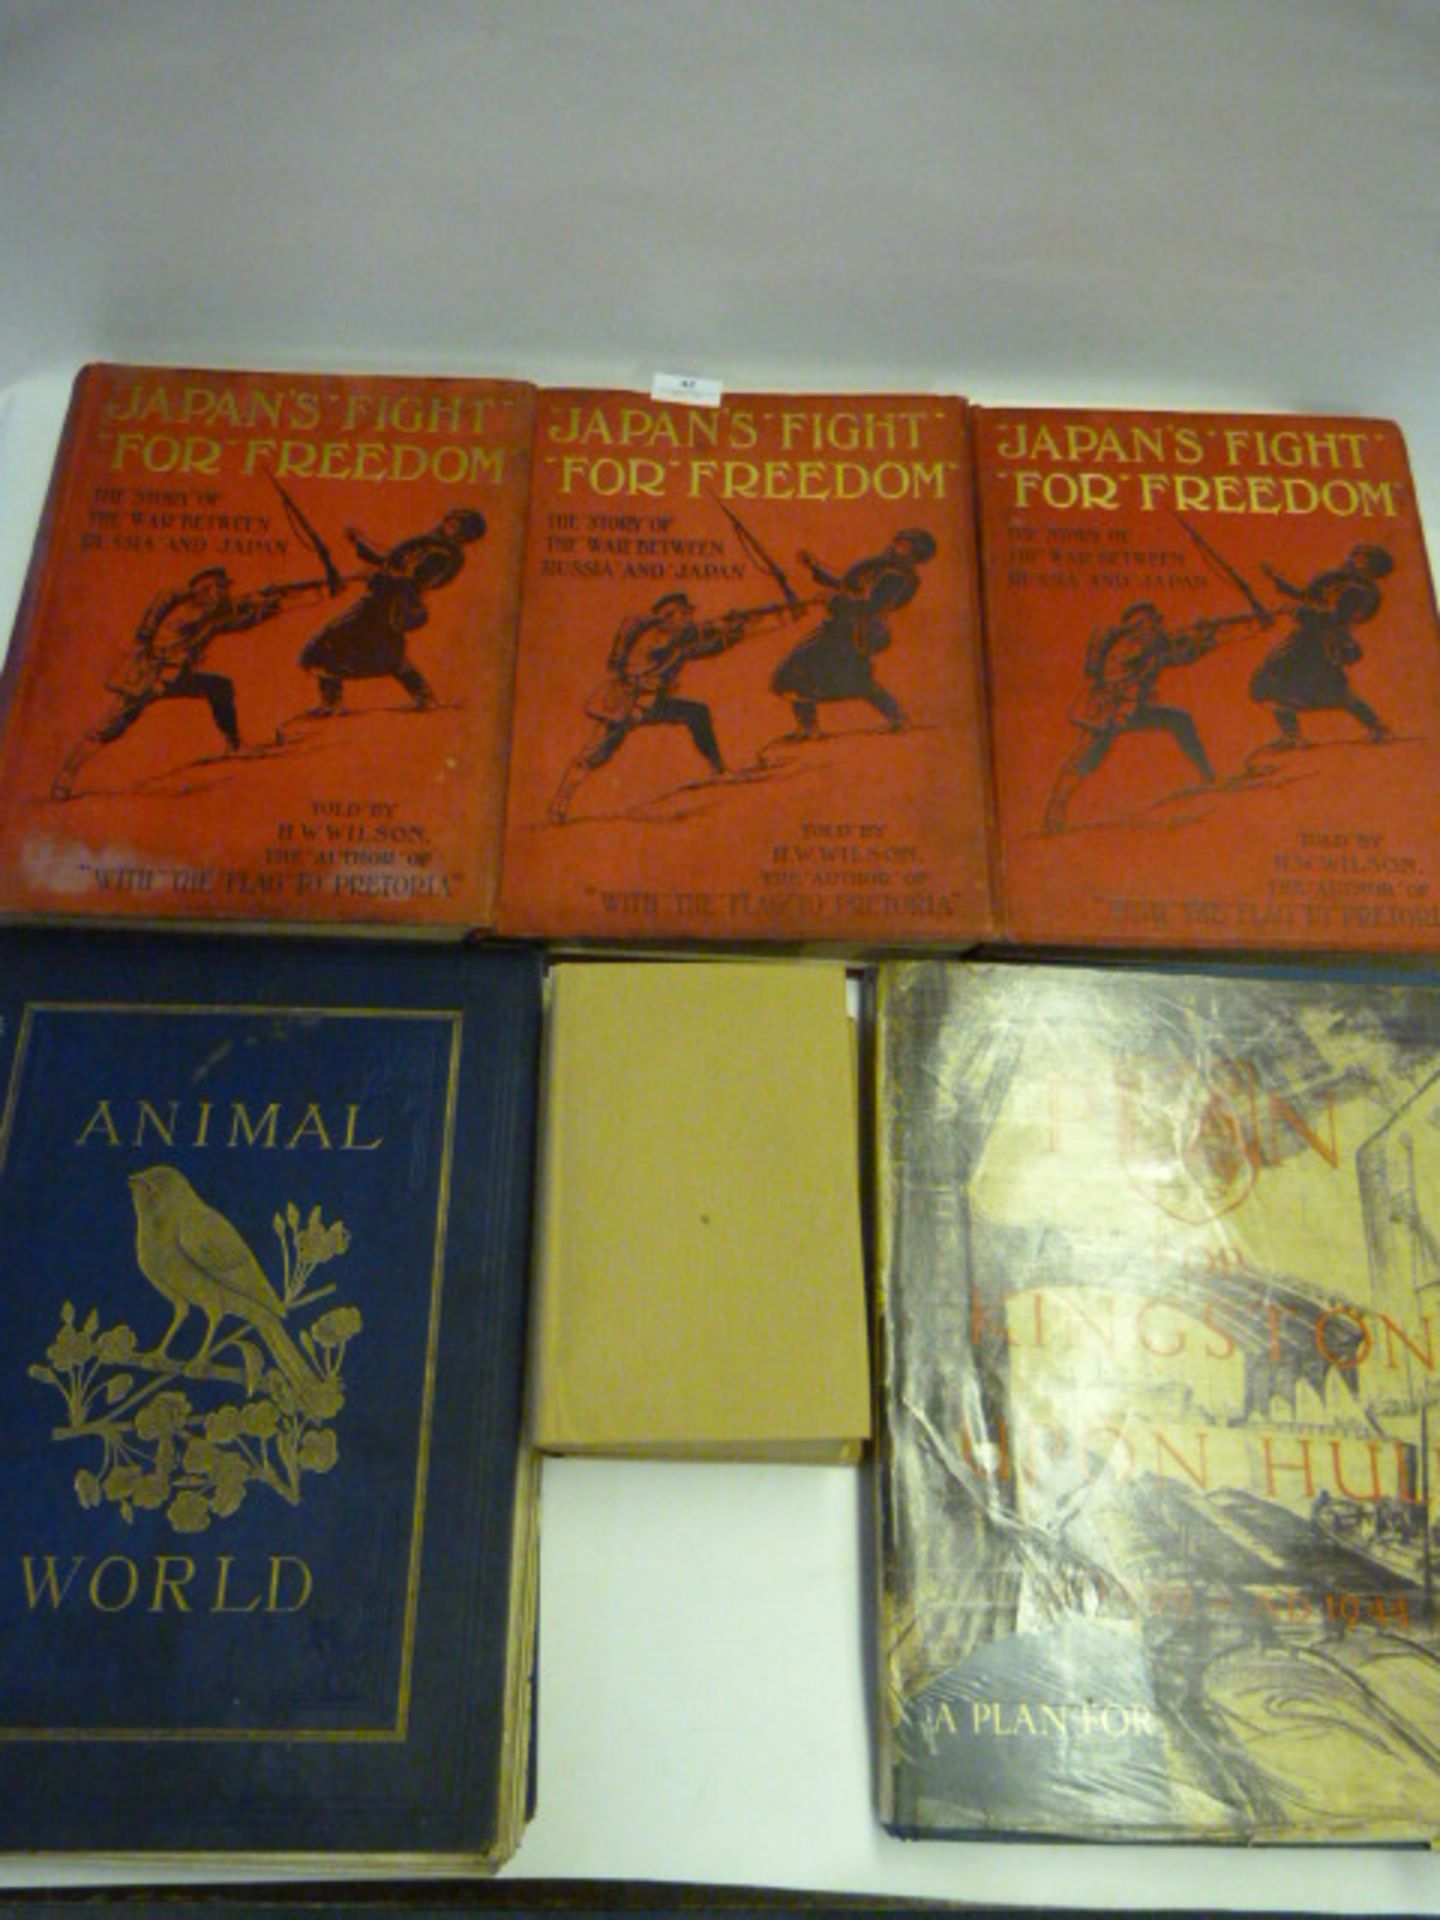 Hardback Books "Japan's Fight for Freedom" and "Kingston Upon Hull 1944"